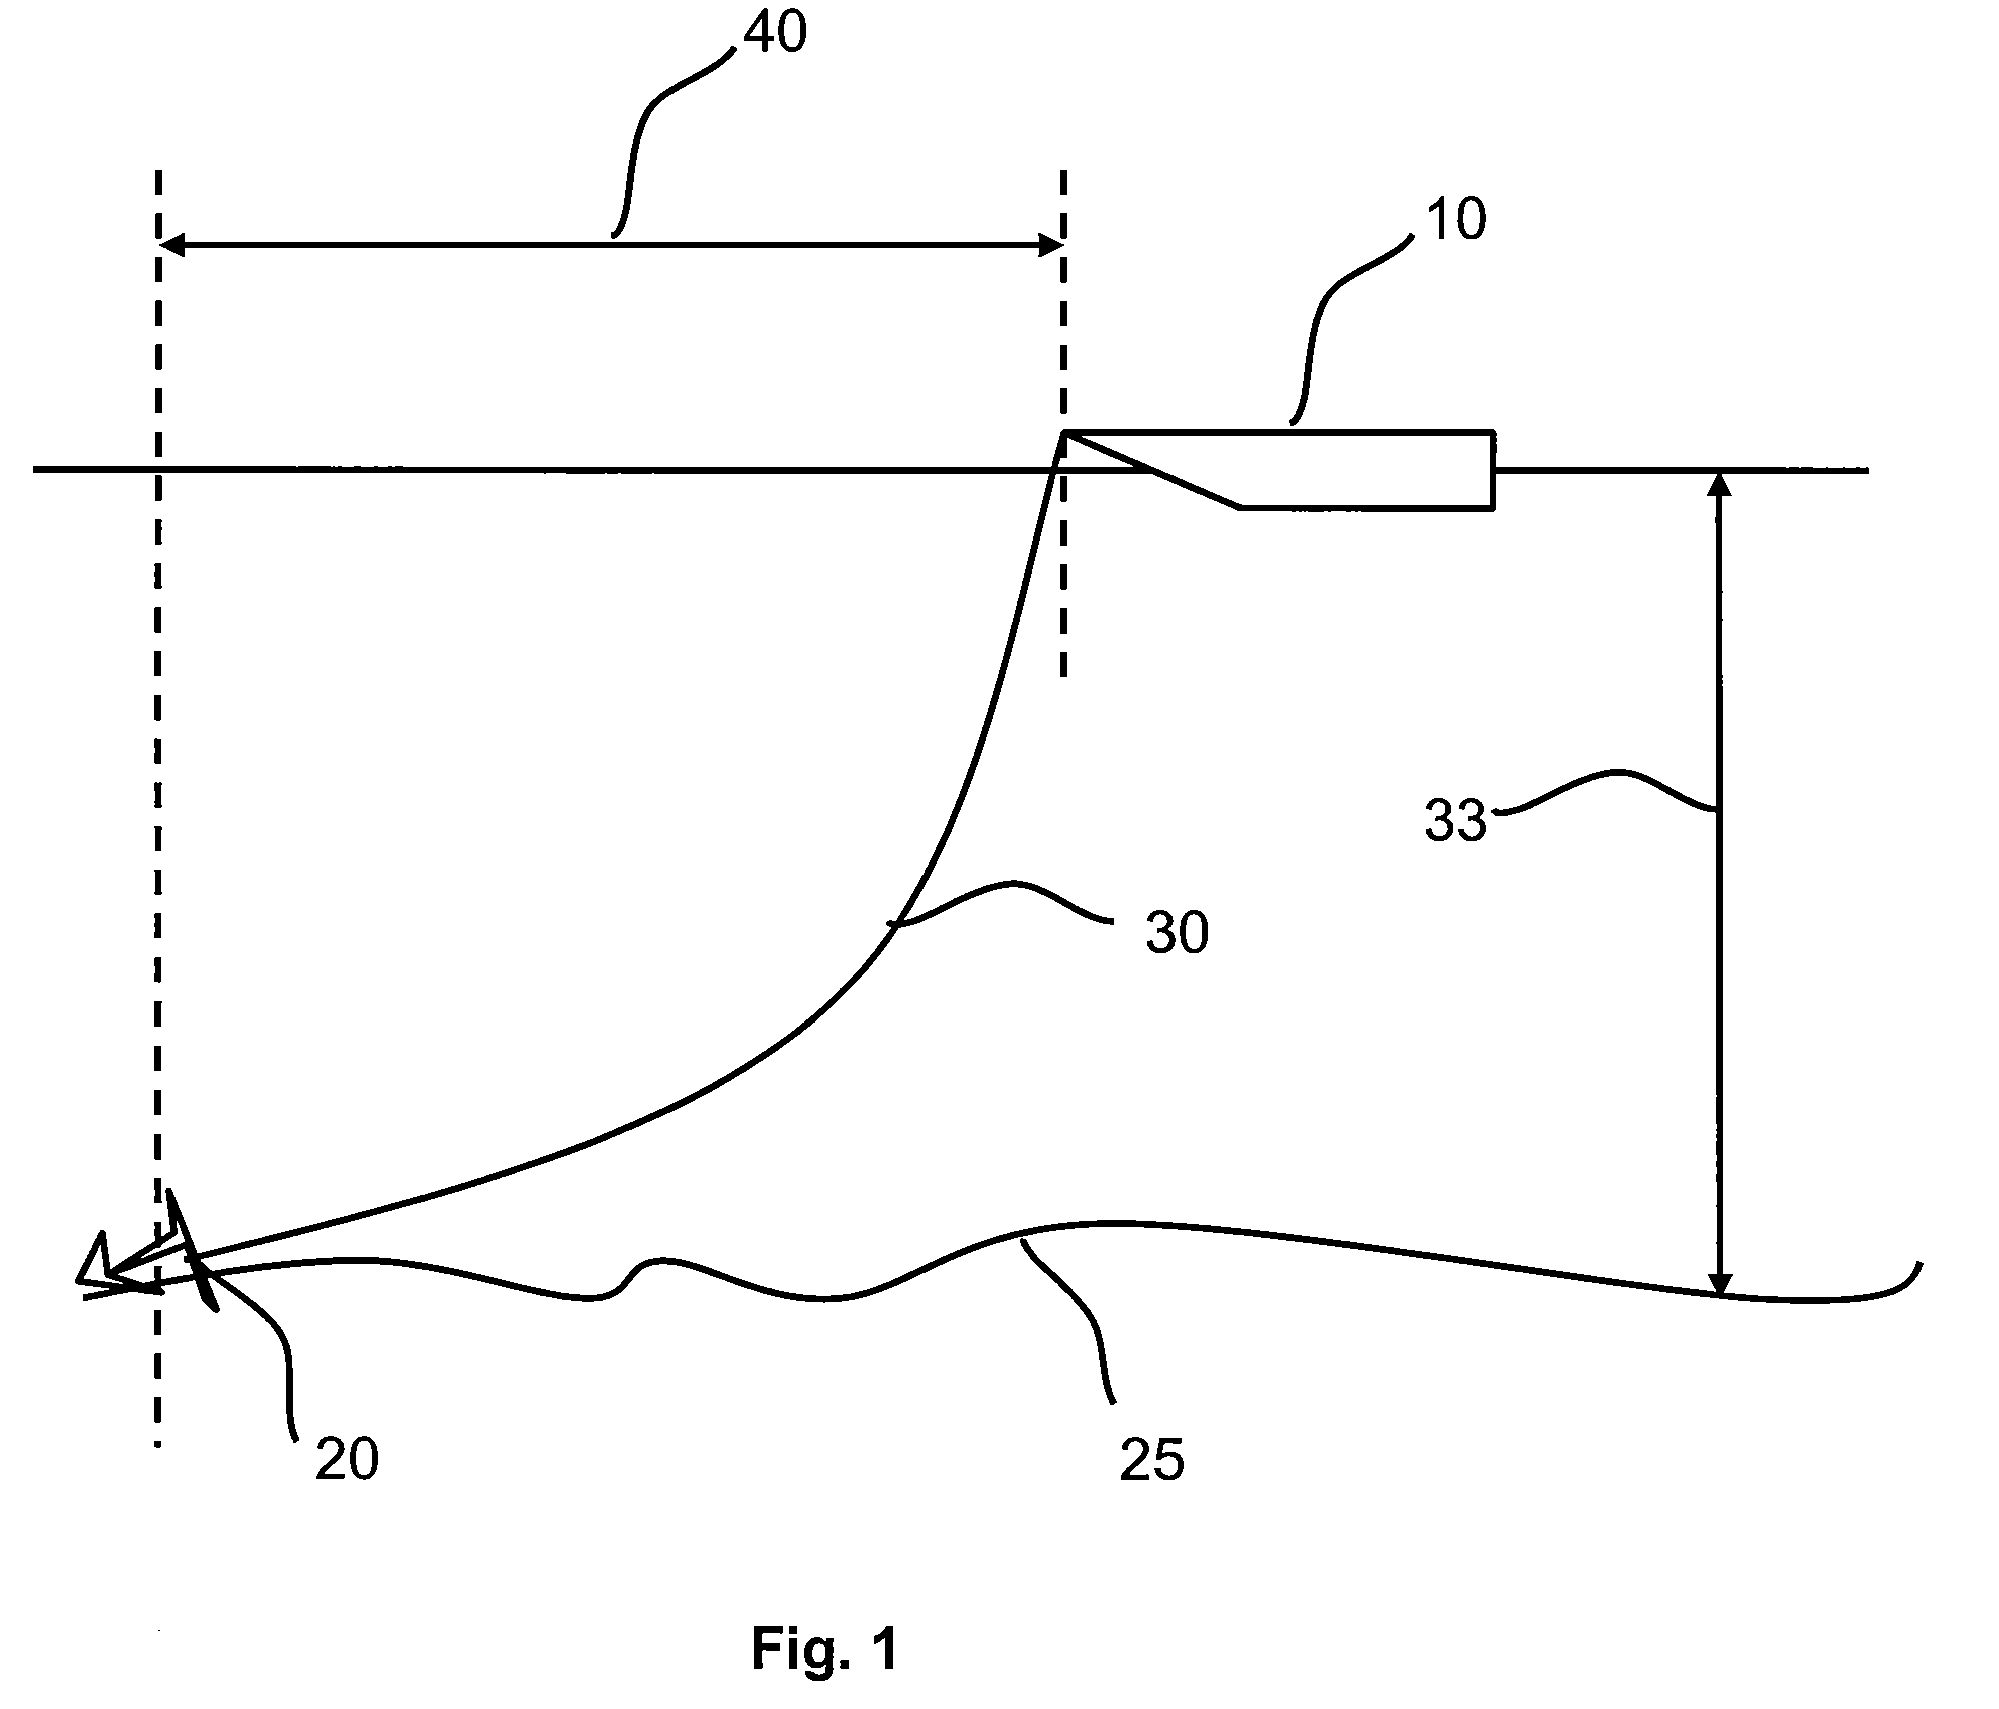 Method of determining and monitoring a distance travelled by a marine vessel connected to anchor